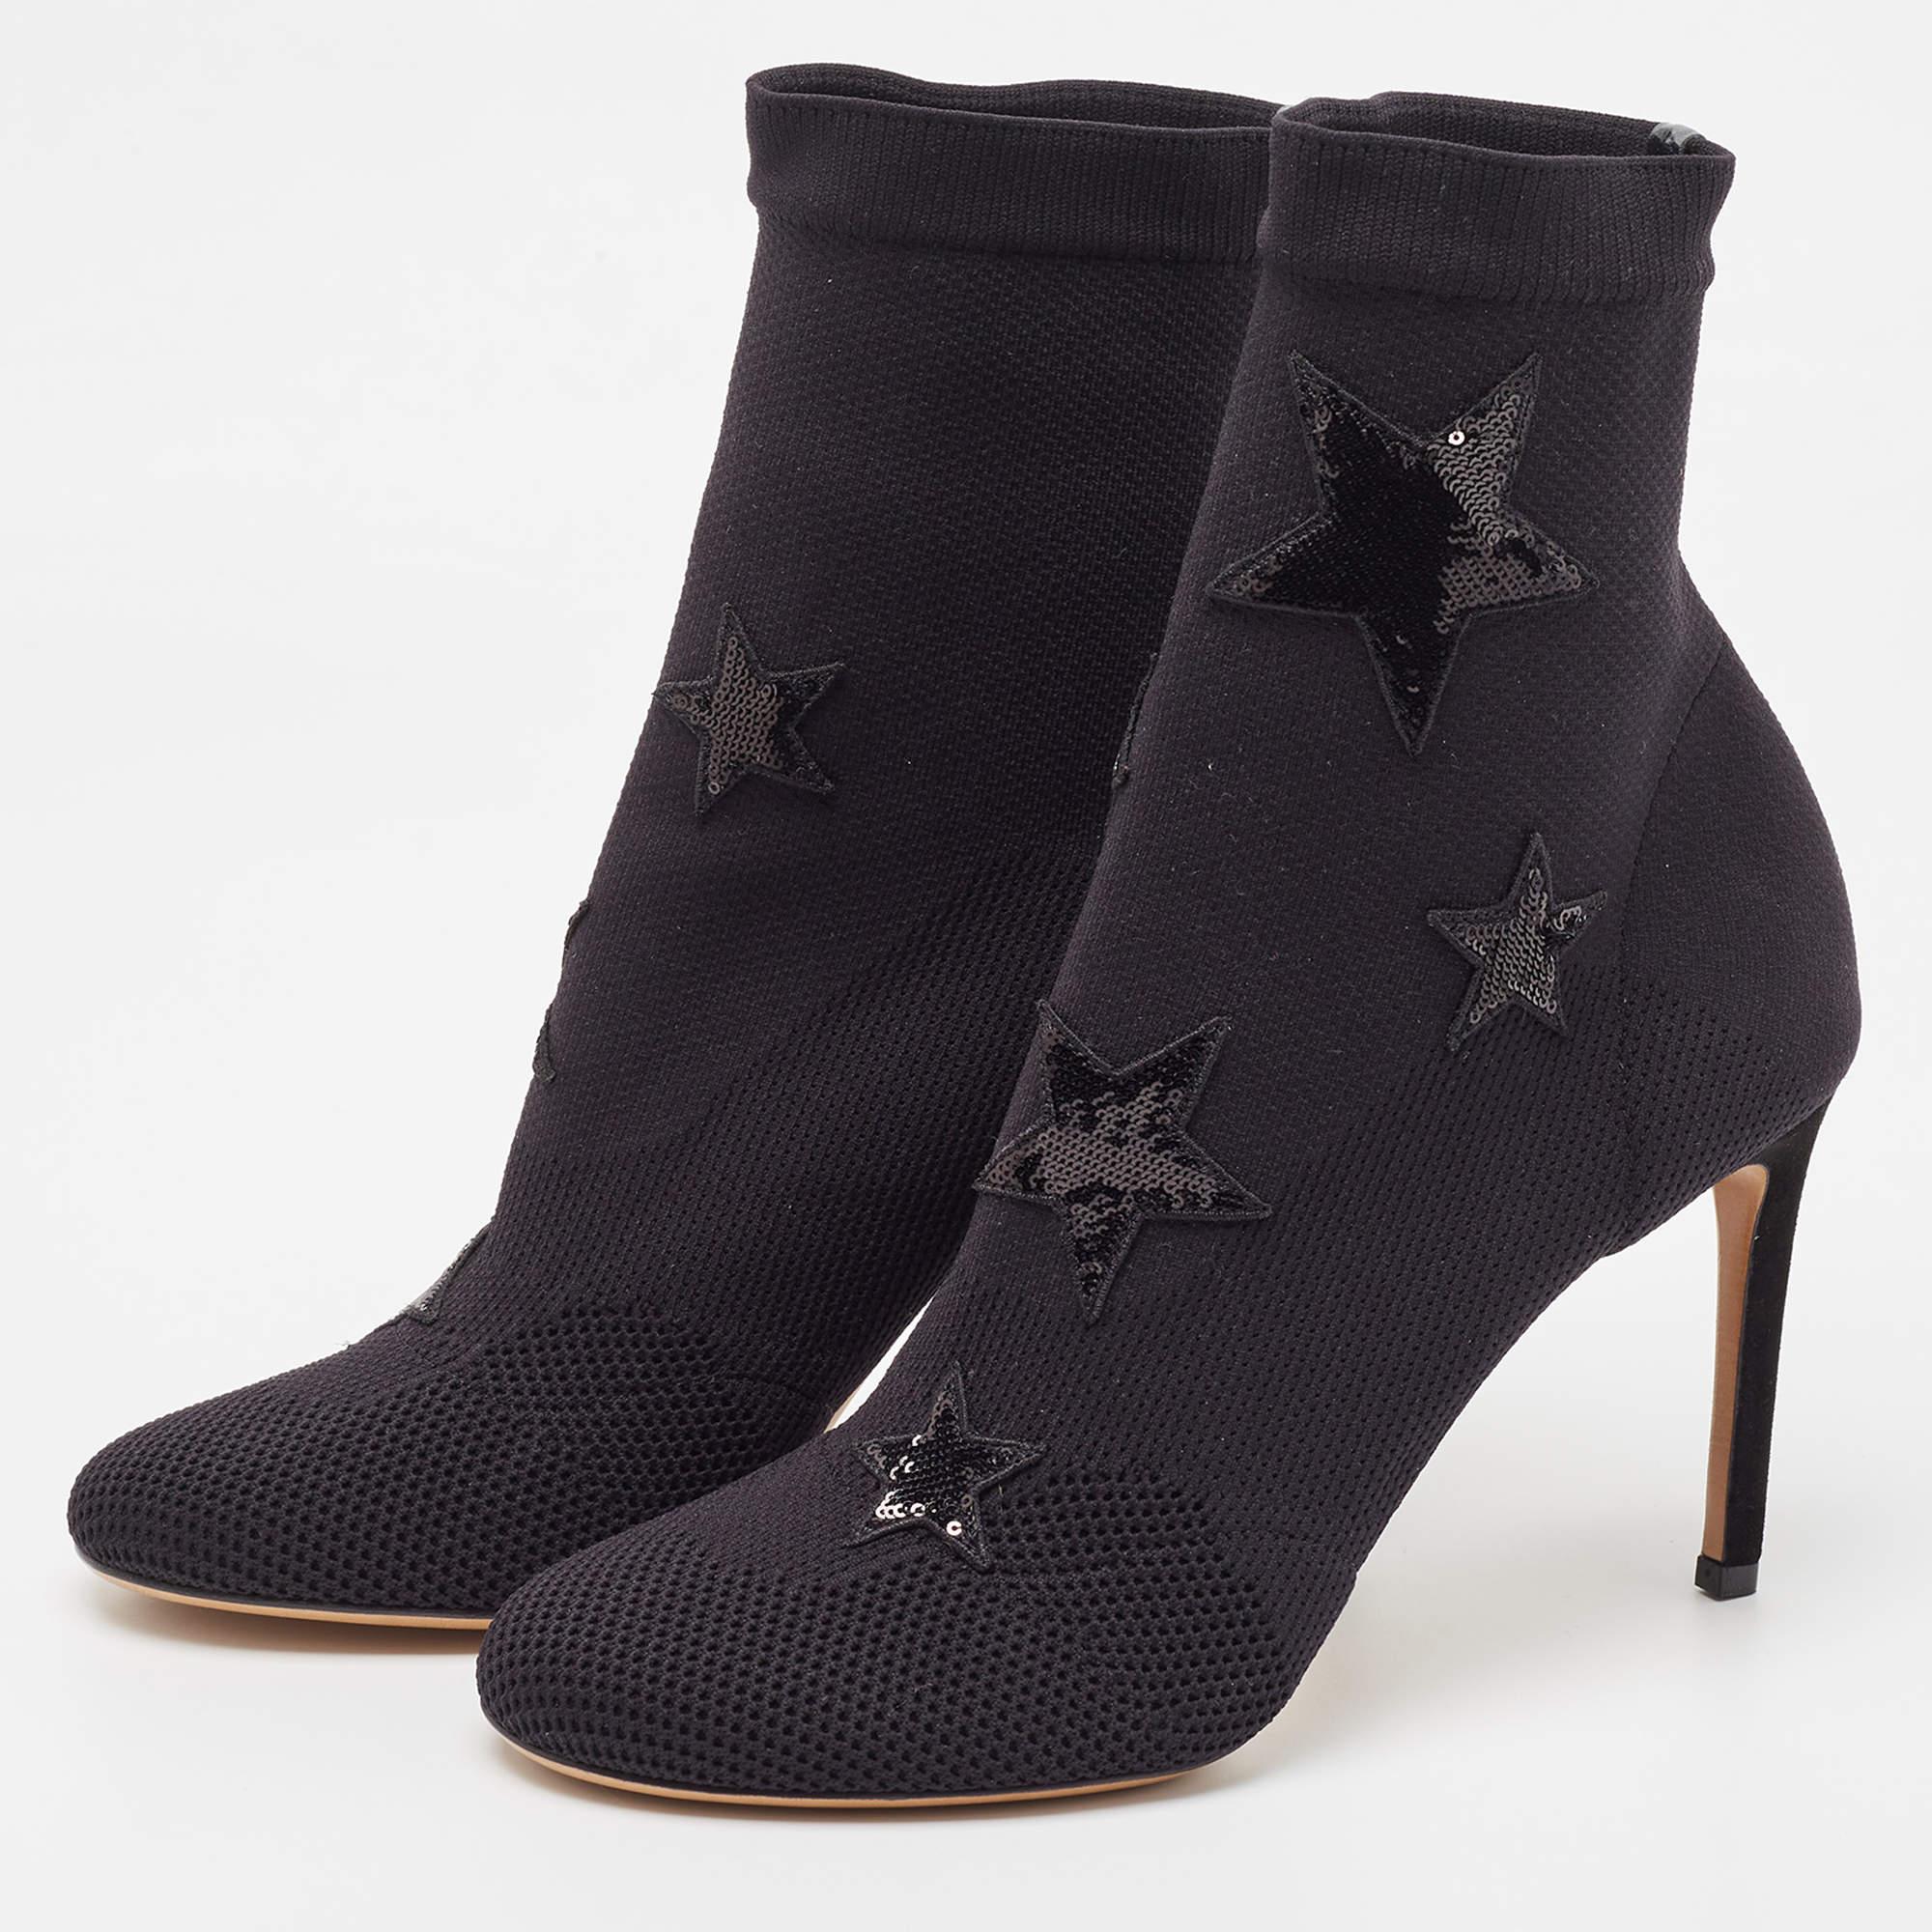 Perfectly sewn and finished to ensure an elegant look and fit, these Valentino boots are a purchase you'll love flaunting. They look great on the feet.

Includes: Original Dustbag, Original Box